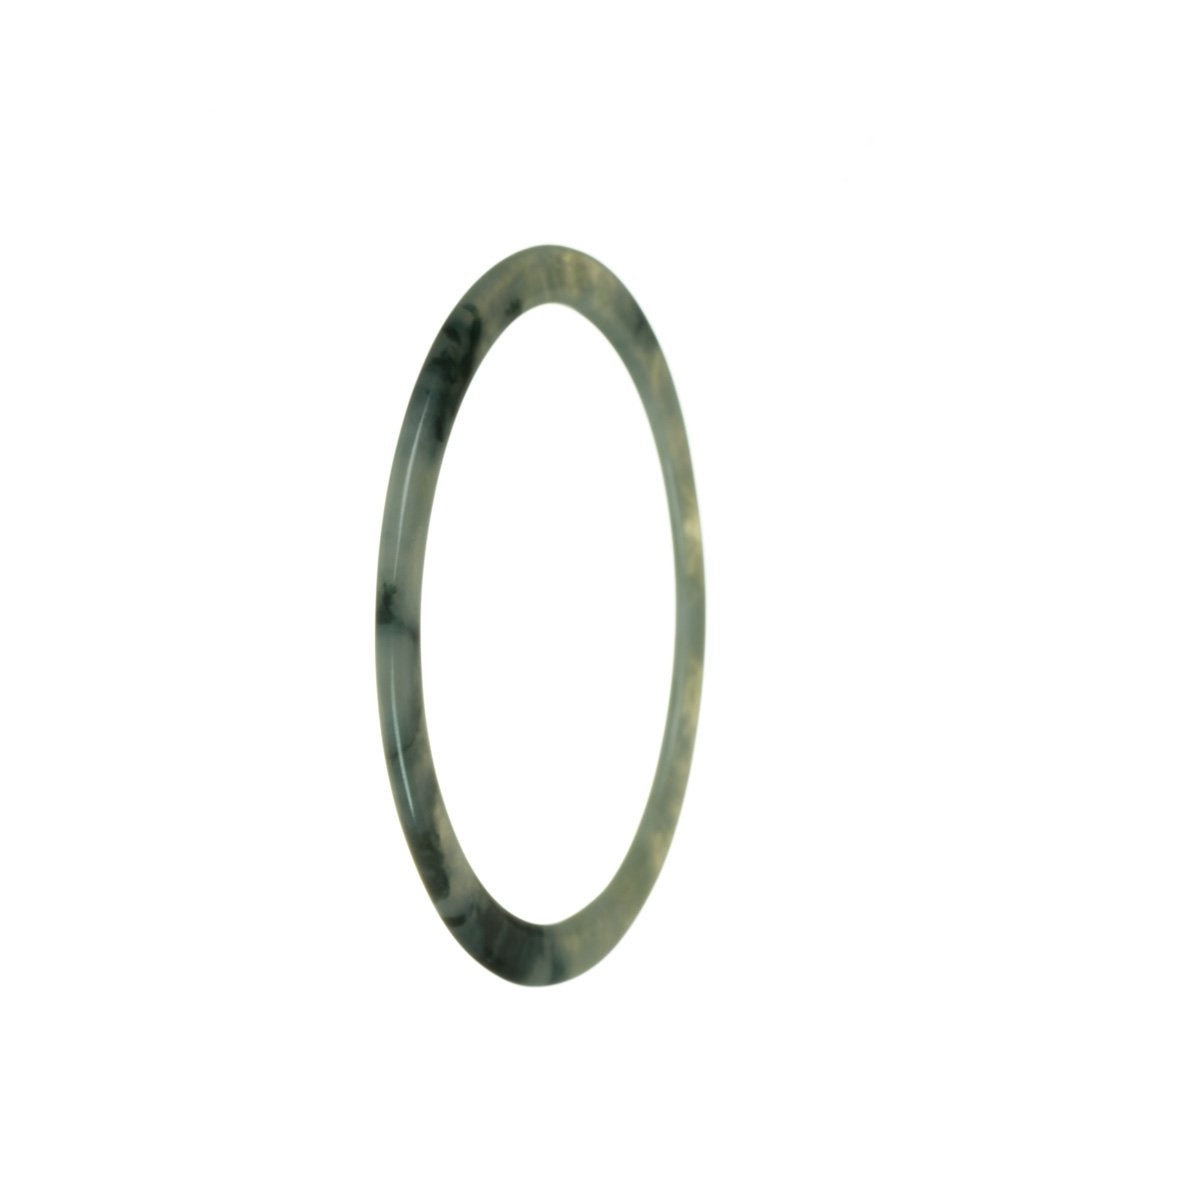 A thin, genuine natural spinach jade bangle bracelet with a traditional design, measuring 58mm in diameter. Crafted by MAYS GEMS.